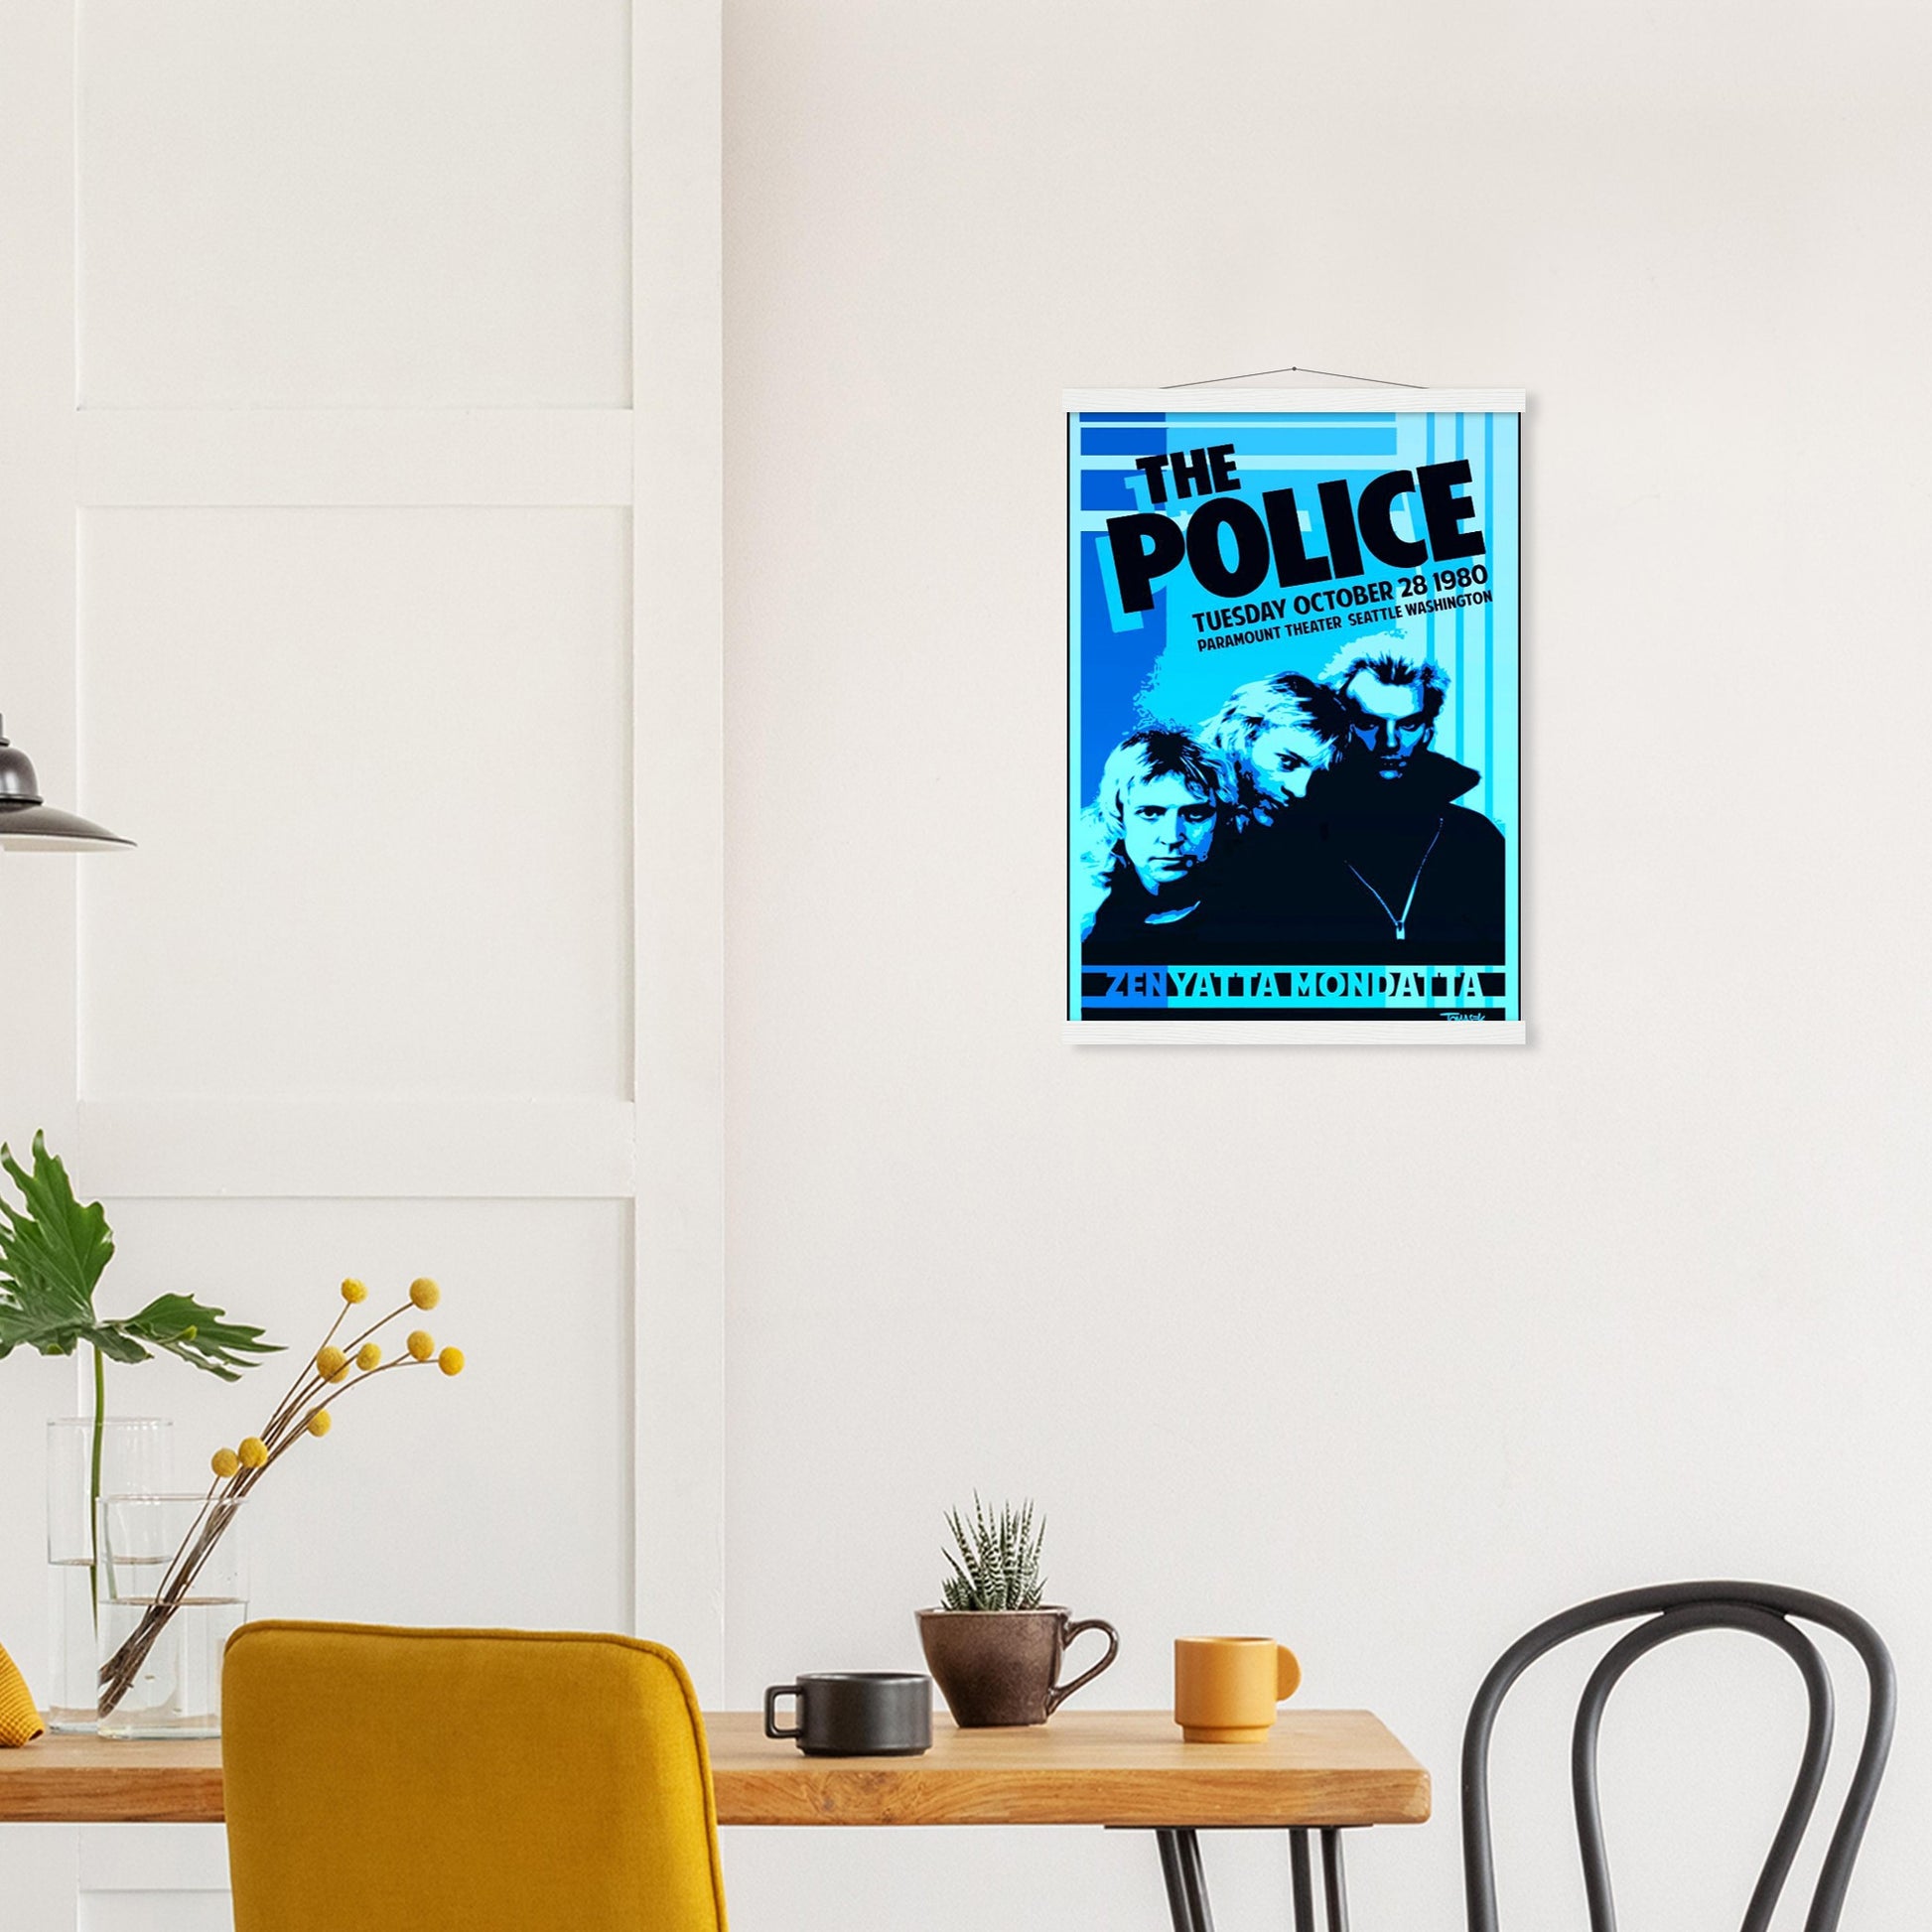 The Police Vintage Poster Reprint on Premium Matte Paper - Posterify